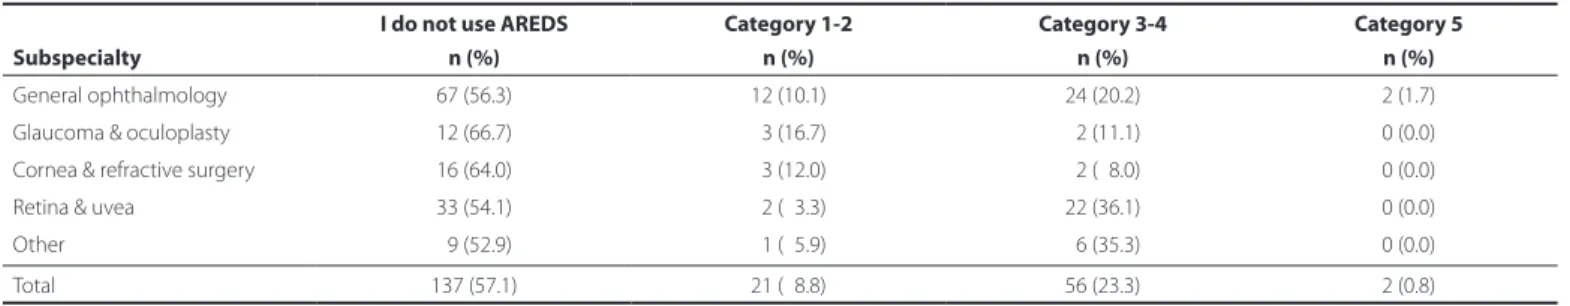 Table 4. Prescribing rates of micronutrition according to the AREDS criteria with respect to subspecialty 